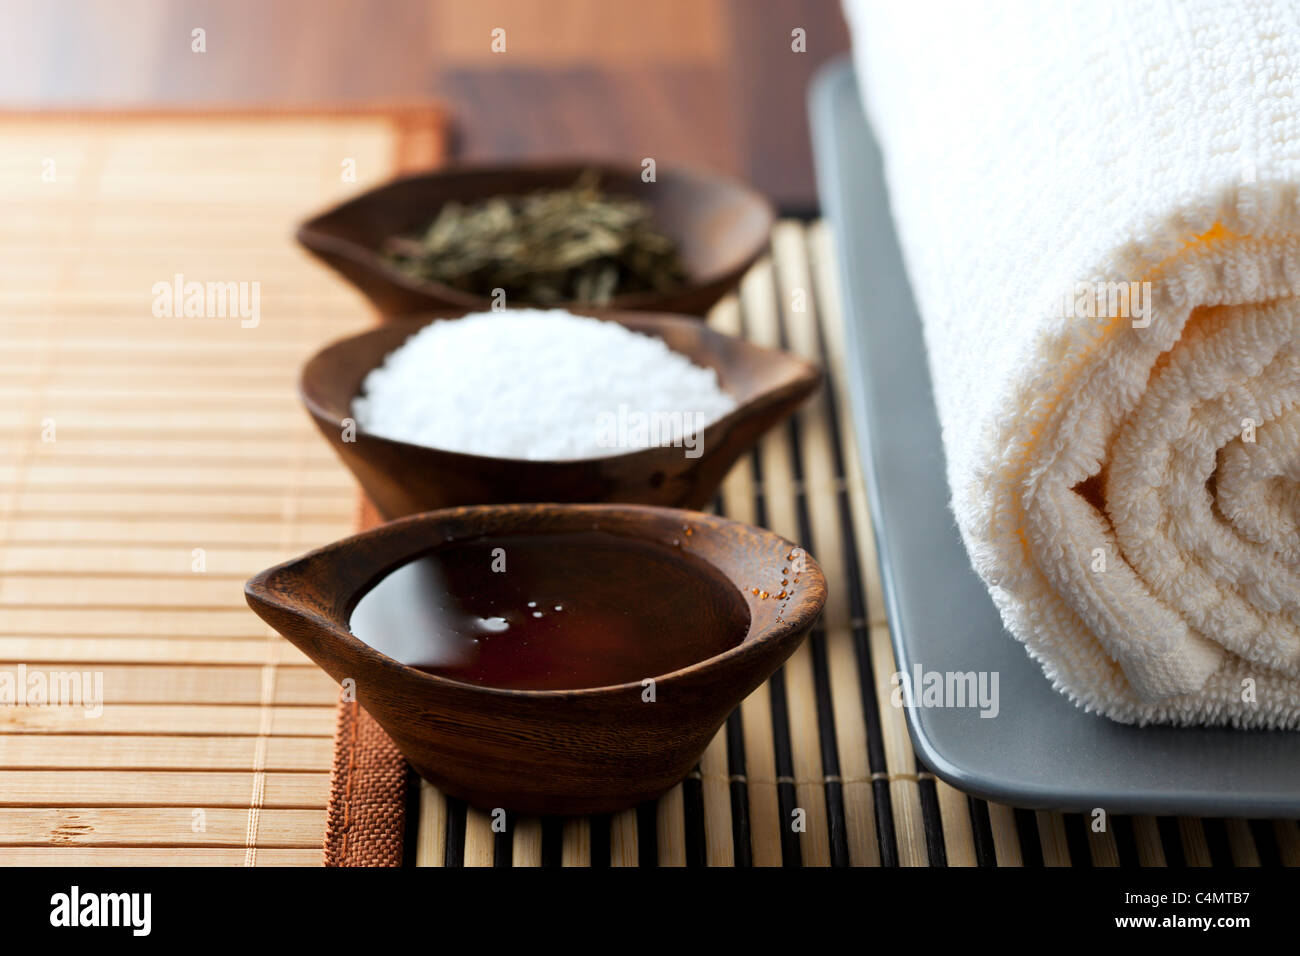 natural bath supplements in small wooden bowls, arranged with rolled towel and bamboo mats Stock Photo